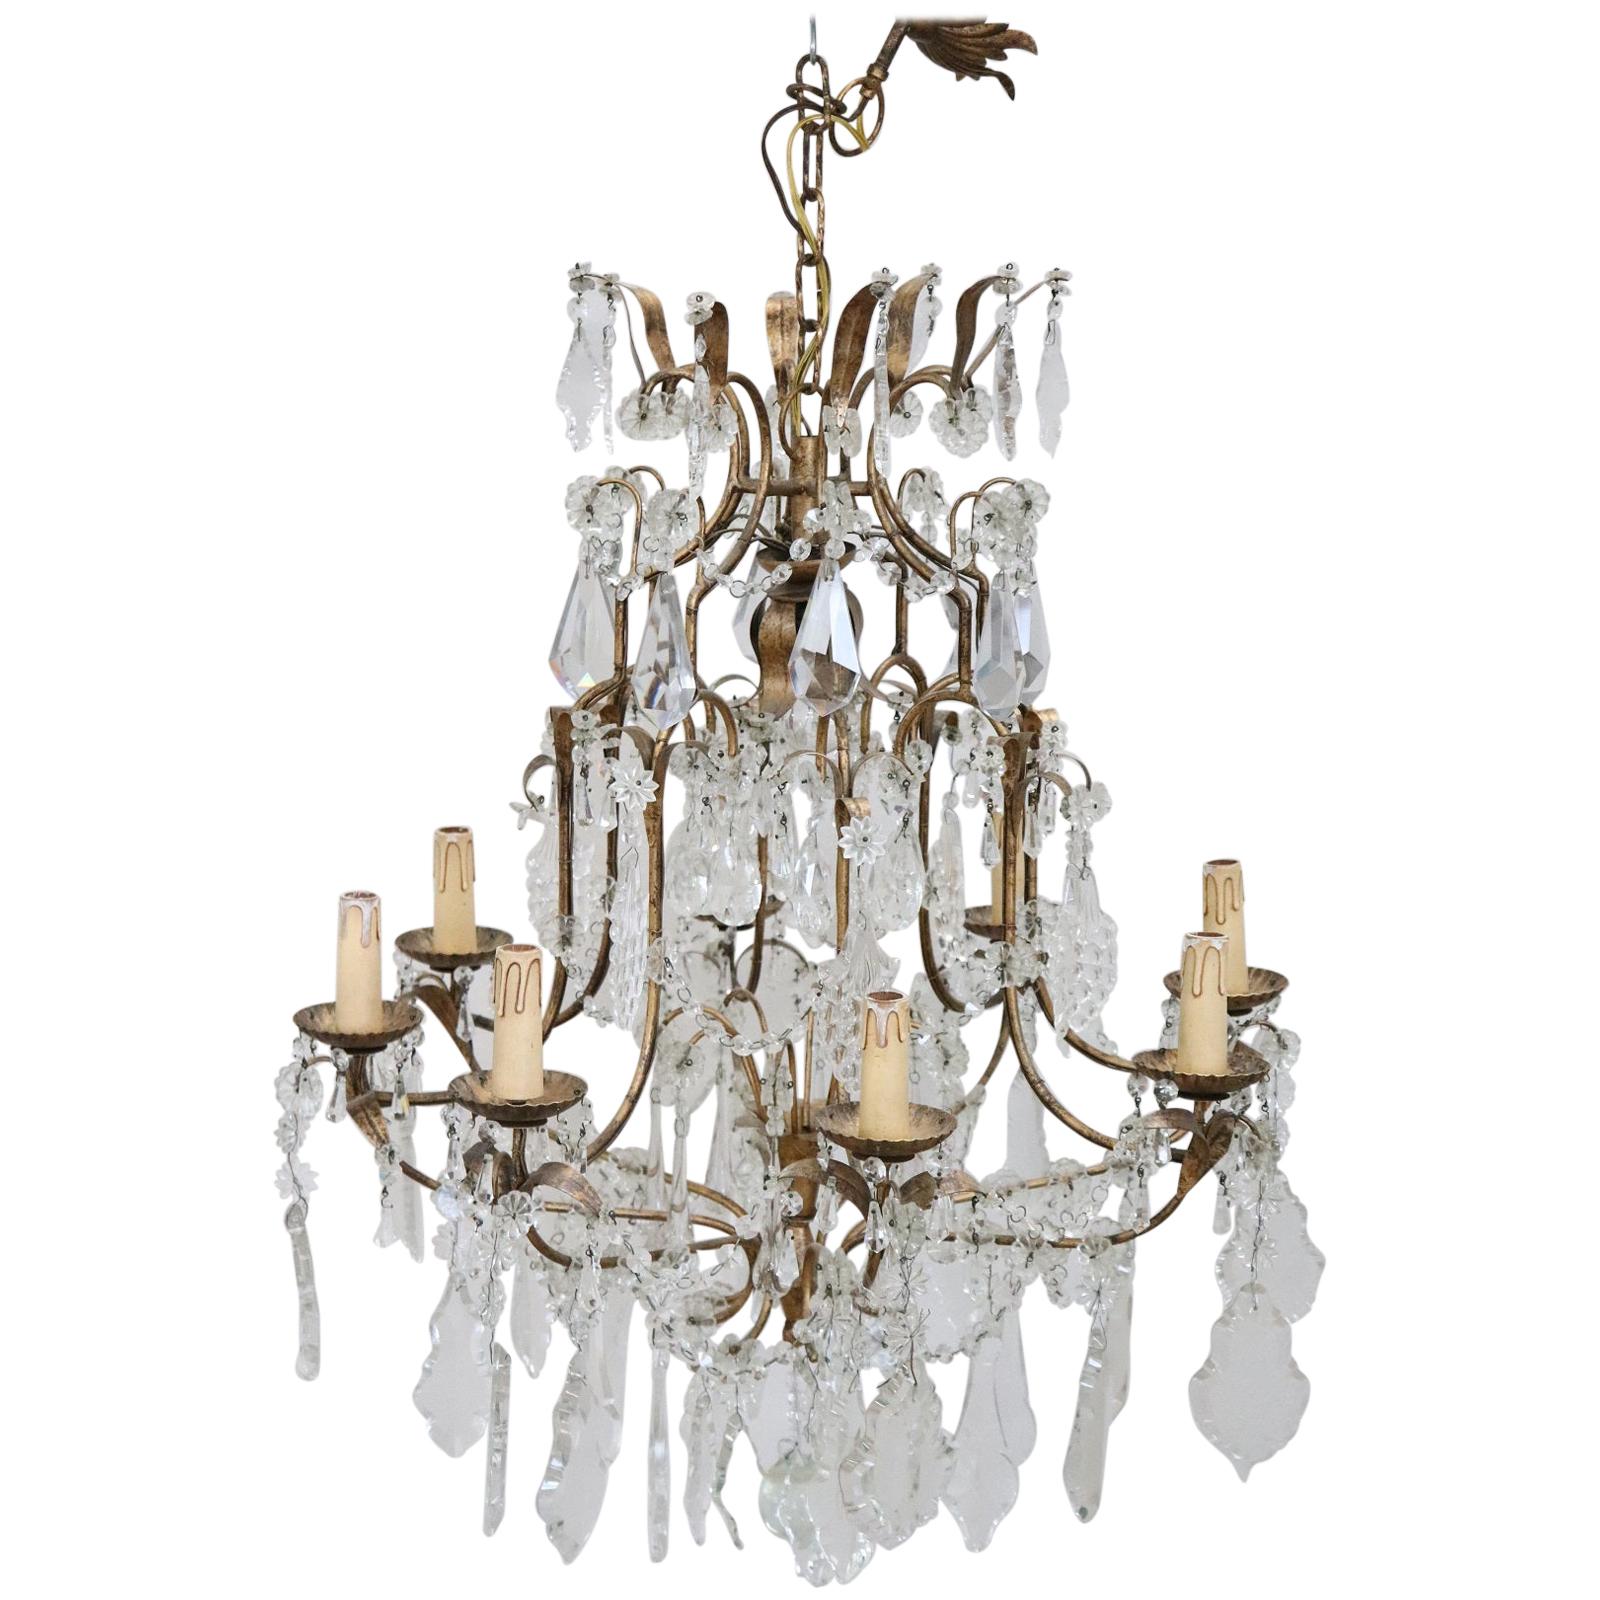 20th Century Louis XVI Style Gilded Bronze and Crystals Chandelier